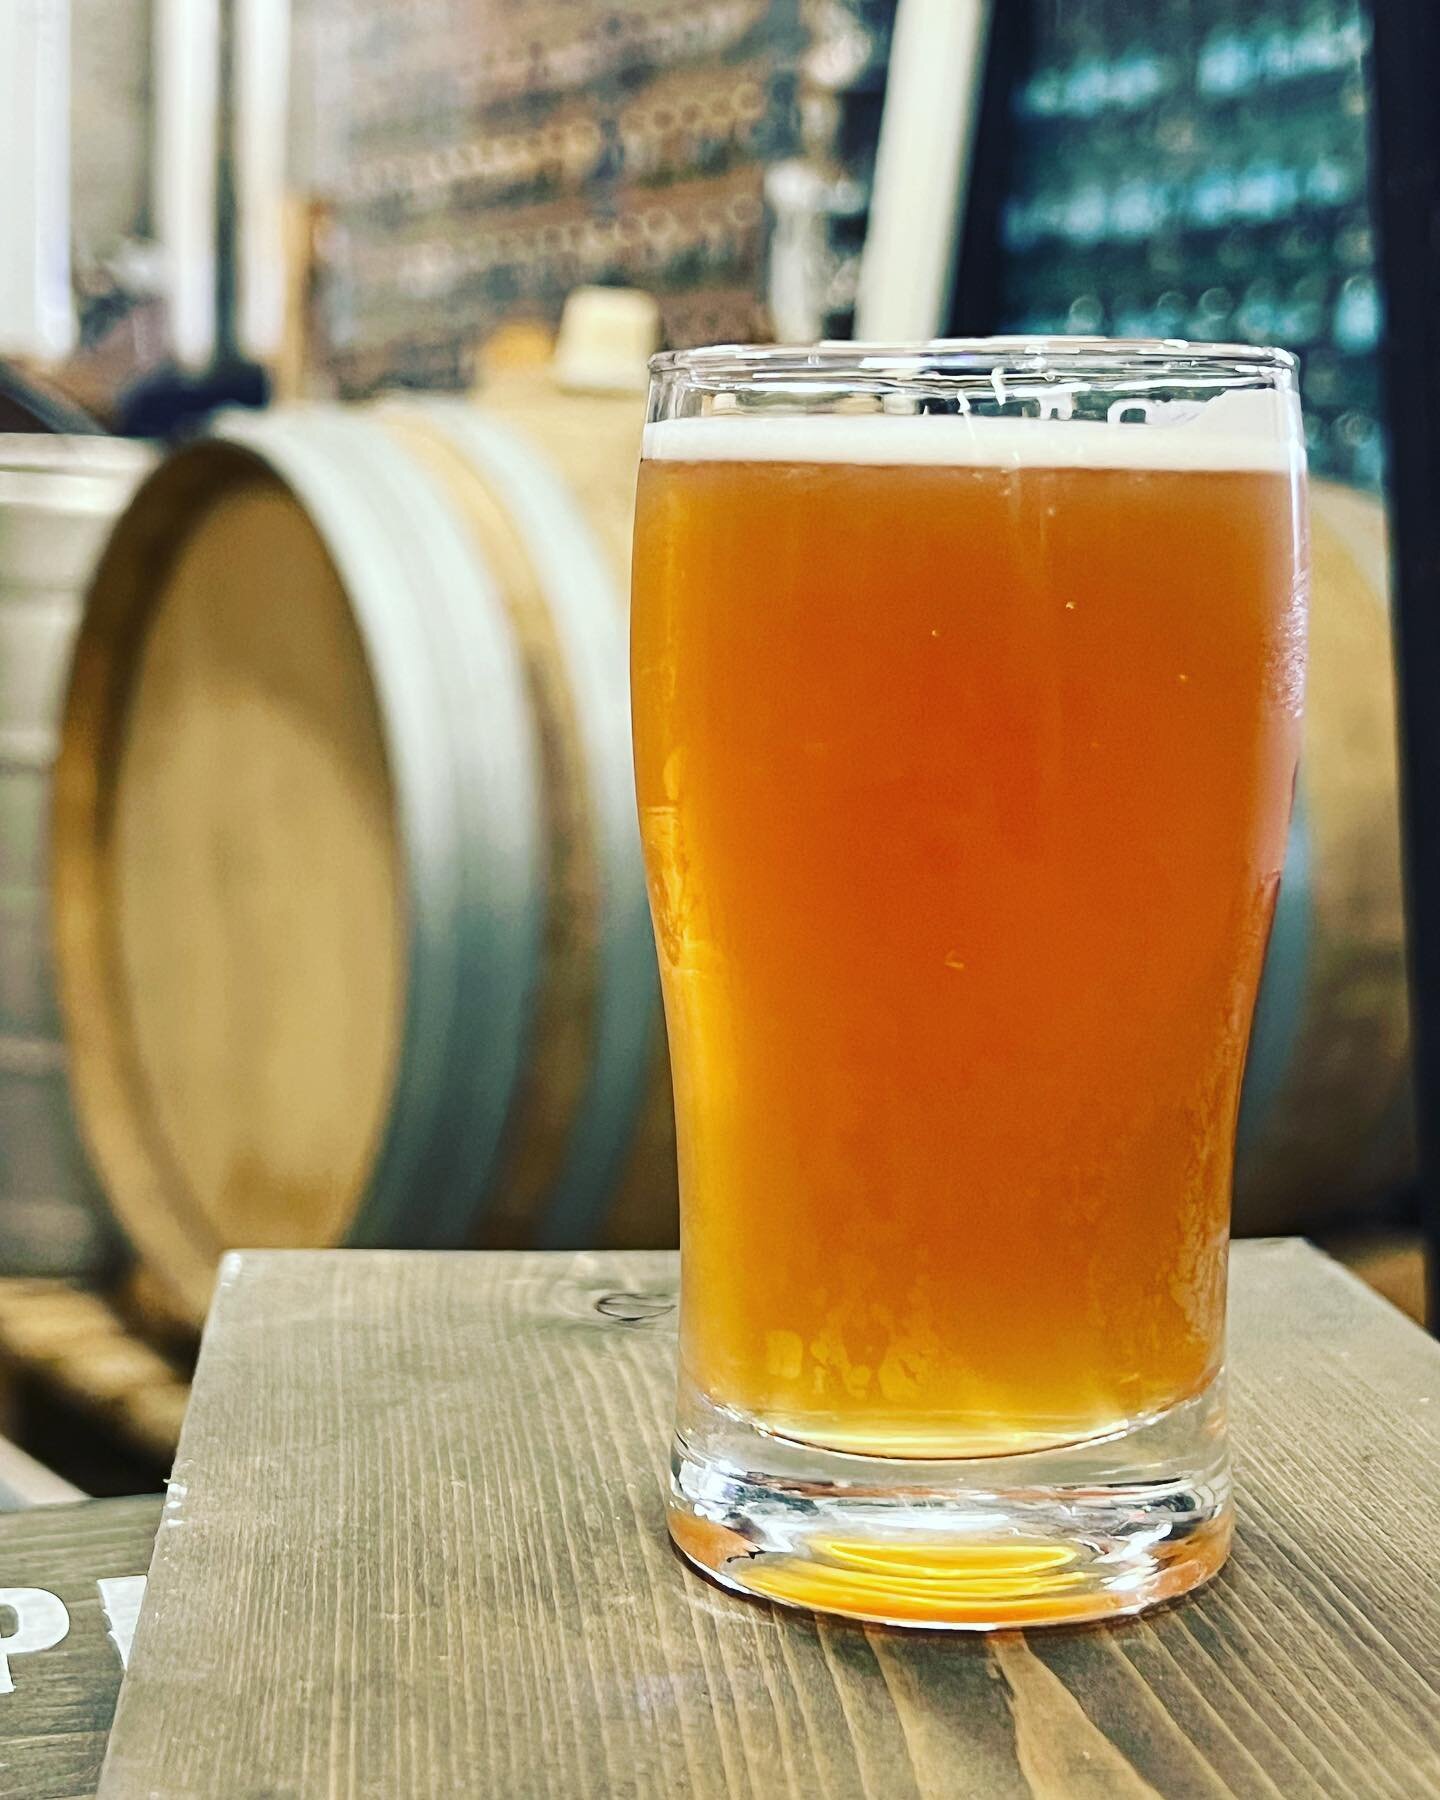 Cheers to all the mamas who&rsquo;ve given so much to raise half-pints through the years. 

Tell her thanks with this half-pint, our Act of Faith beer aged in a Valley Mills Vineyard Counoise (red wine) barrel.